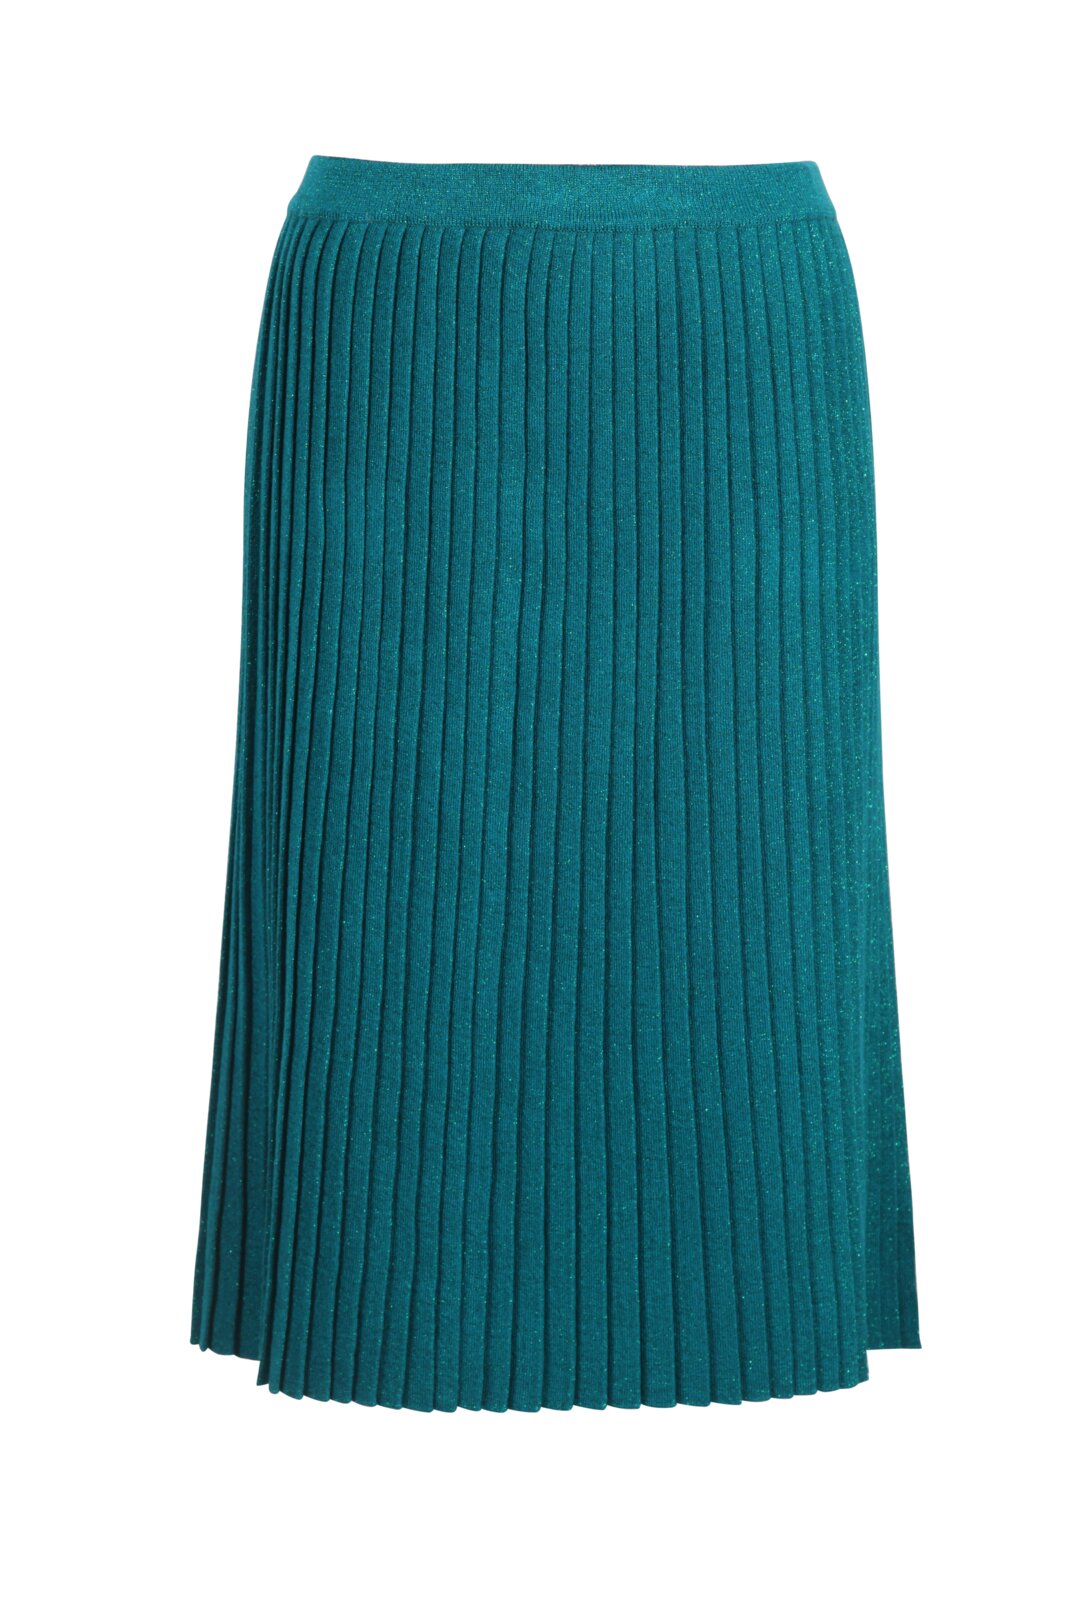 Solid Skirt with Pleats